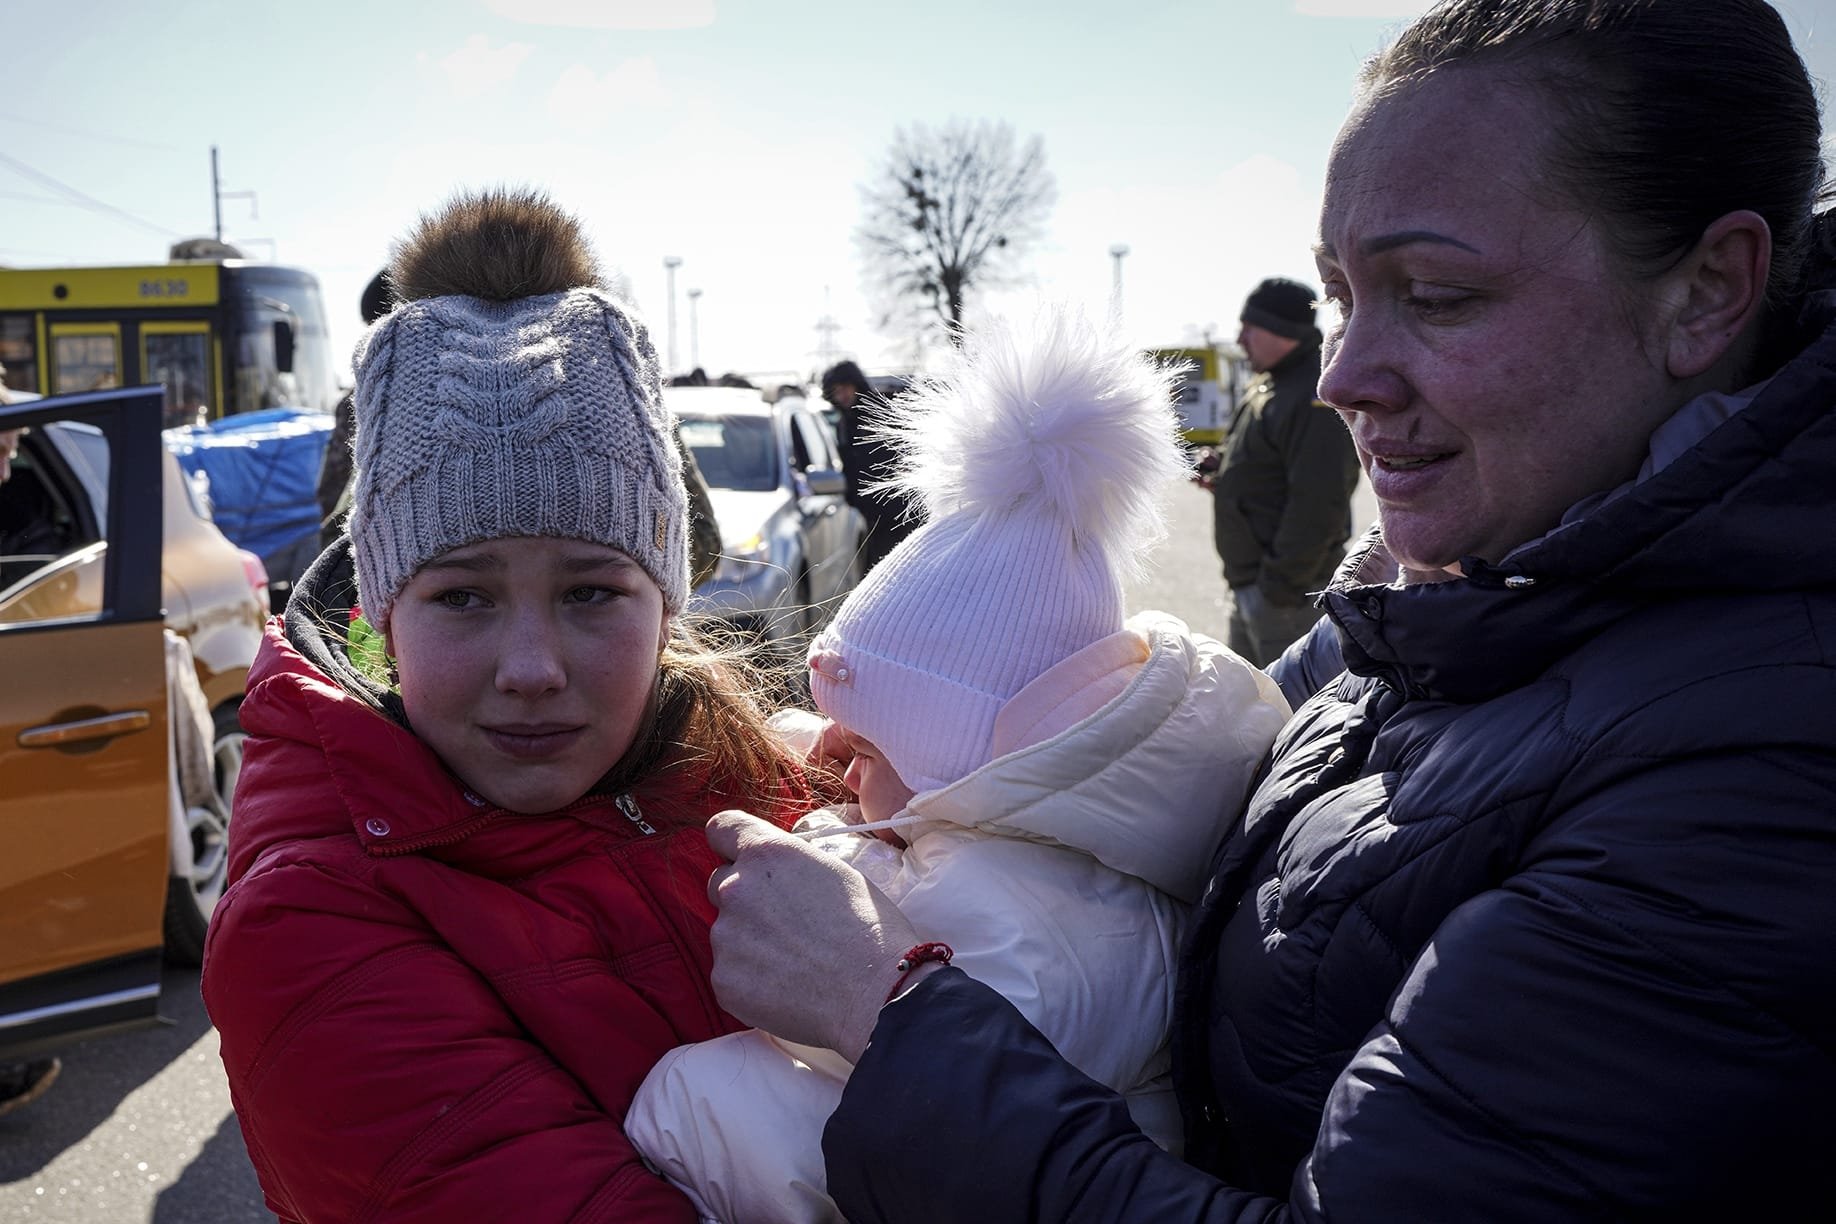 Ukrainian civilians flee with white flags amid Russian invasion | Daily ...